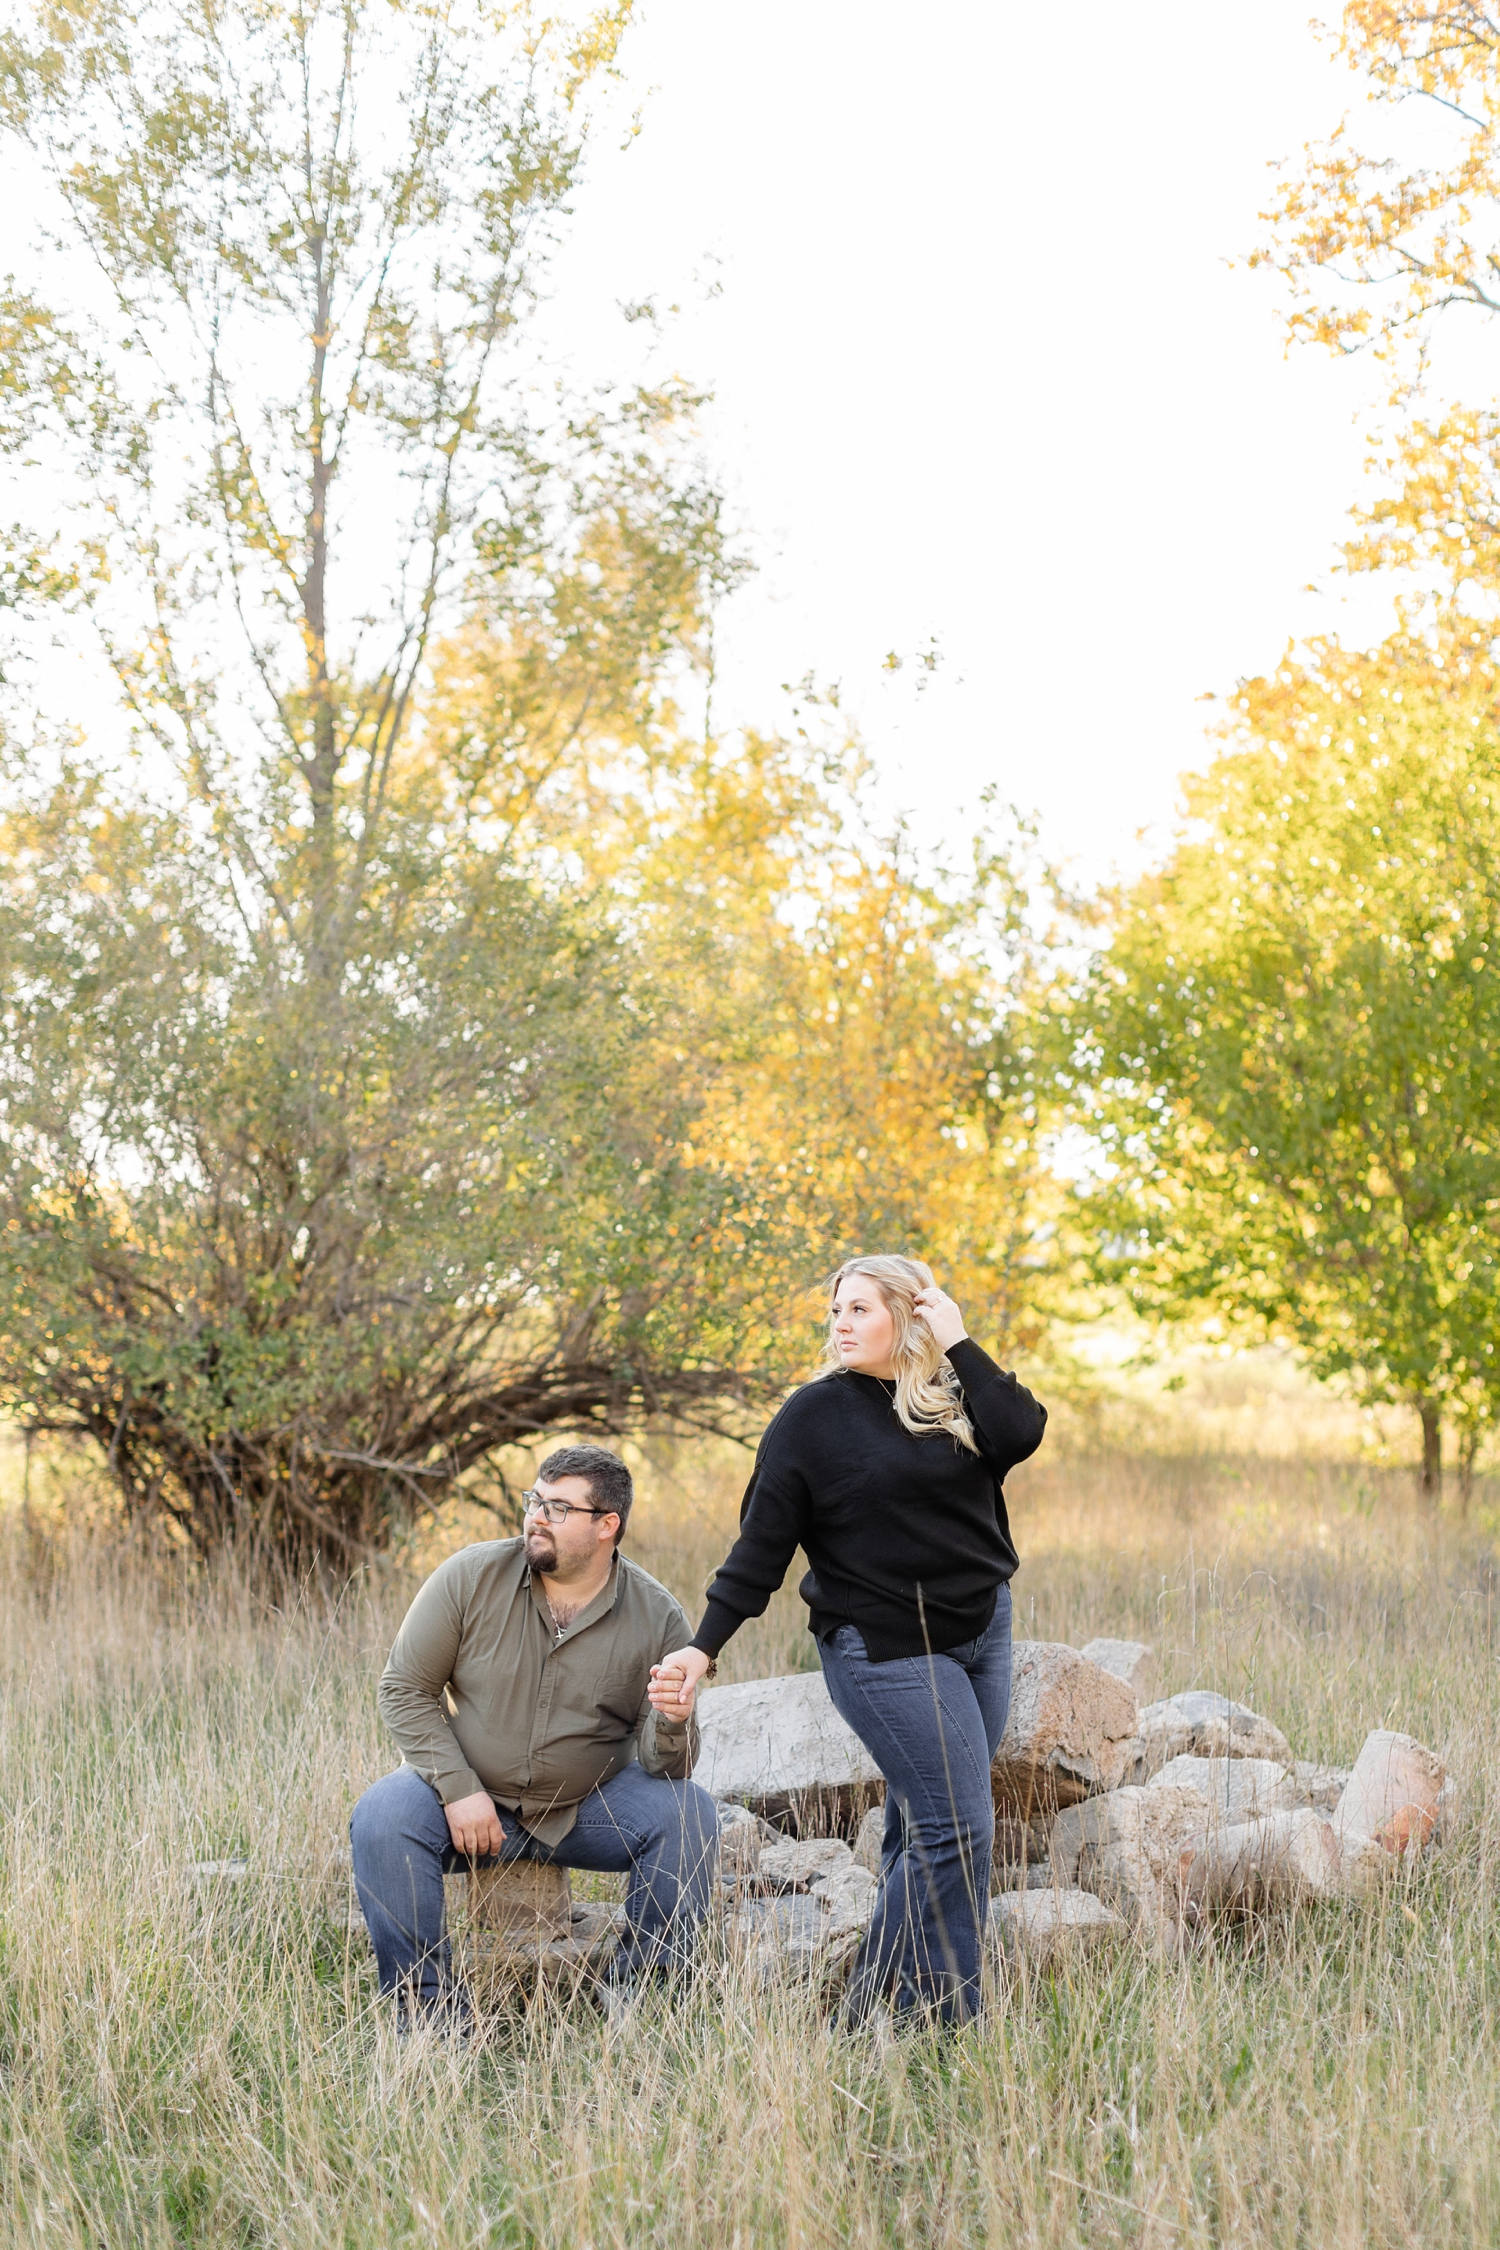 Nick sits on a pile of rocks in the middle of a grassy field as Halie stands and holds his hand and they both look off into the distance | CB Studio